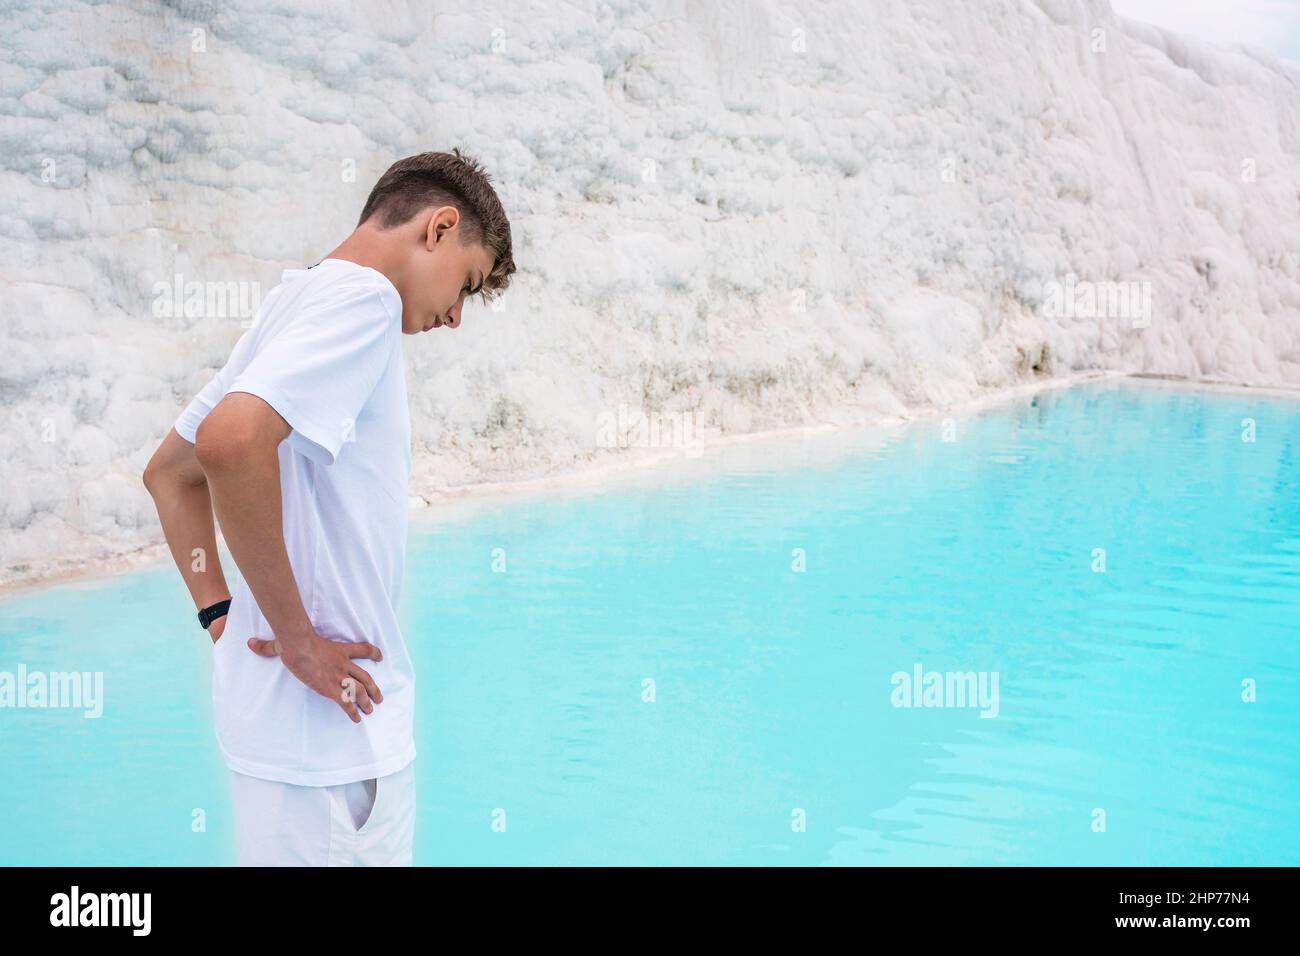 Cotton castle in southwestern Turkey, teenager in white tshirt and shorts, natural pool Pamukkale Stock Photo